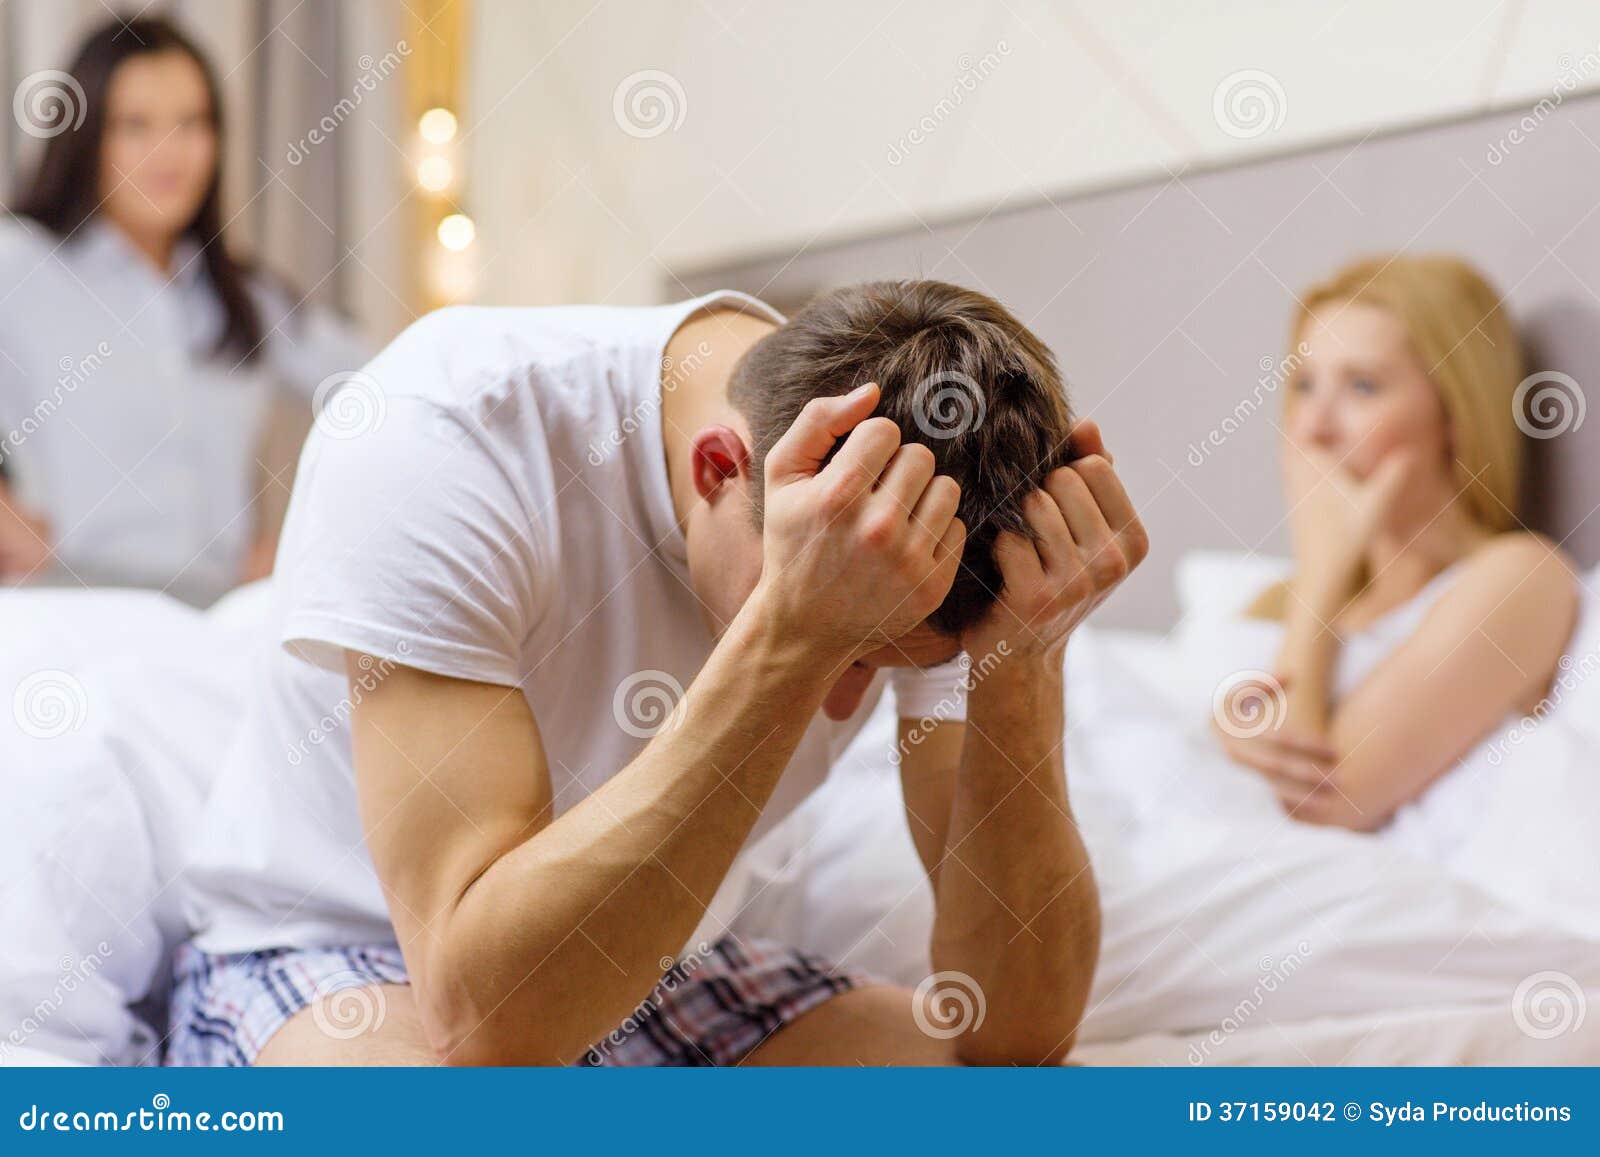 Man Sitting on the Bed with Two Women on the Back Stock Photo picture